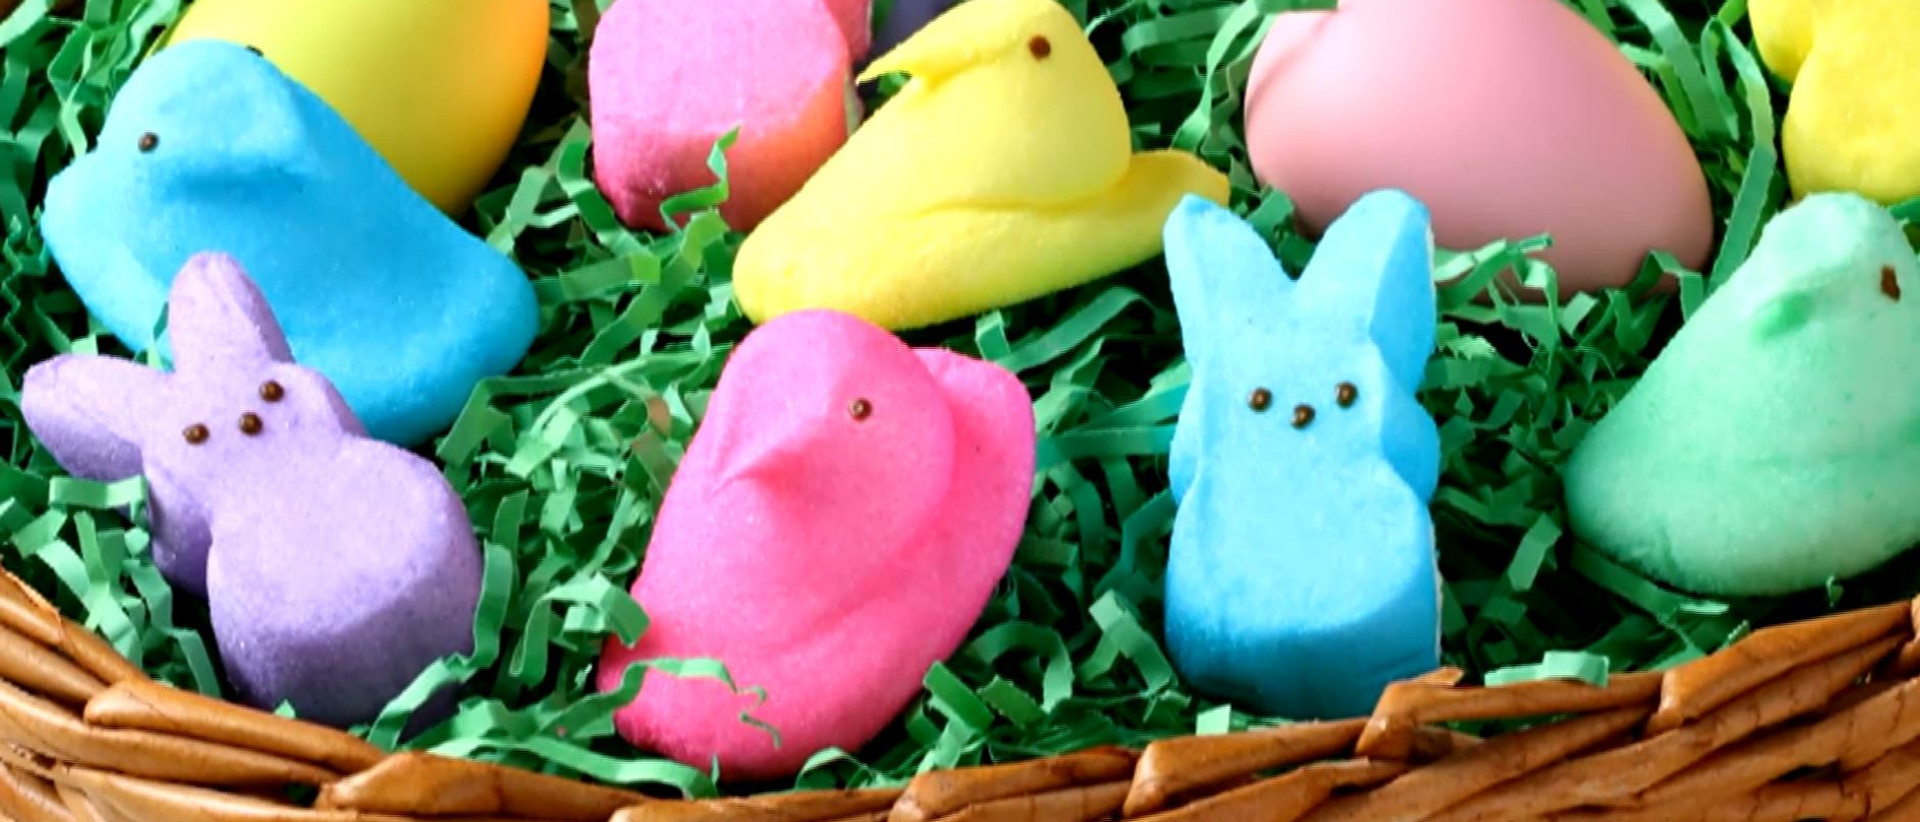 peepsbrand al Twitter Now you can express your PEEPSONALITY virtually  Try these PEEPS zoom backgrounds on your next video call  easter  httpstcoITYEUAuSPD  Twitter